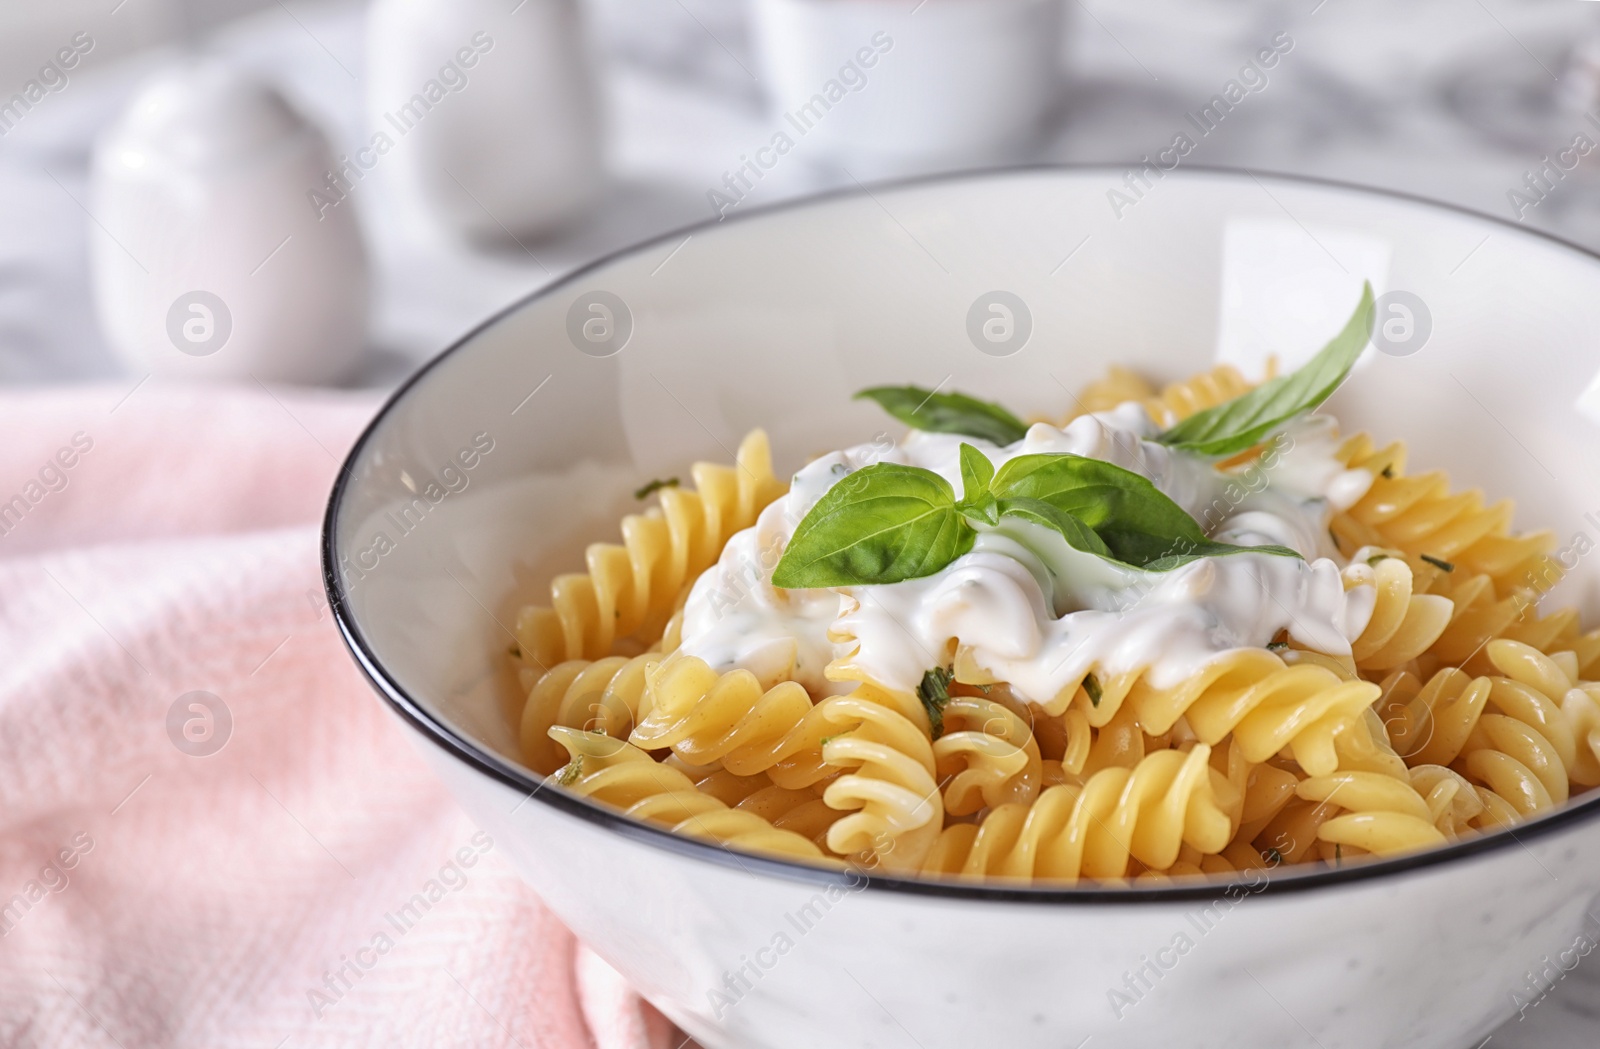 Photo of Delicious pasta with sauce and basil on table, closeup view